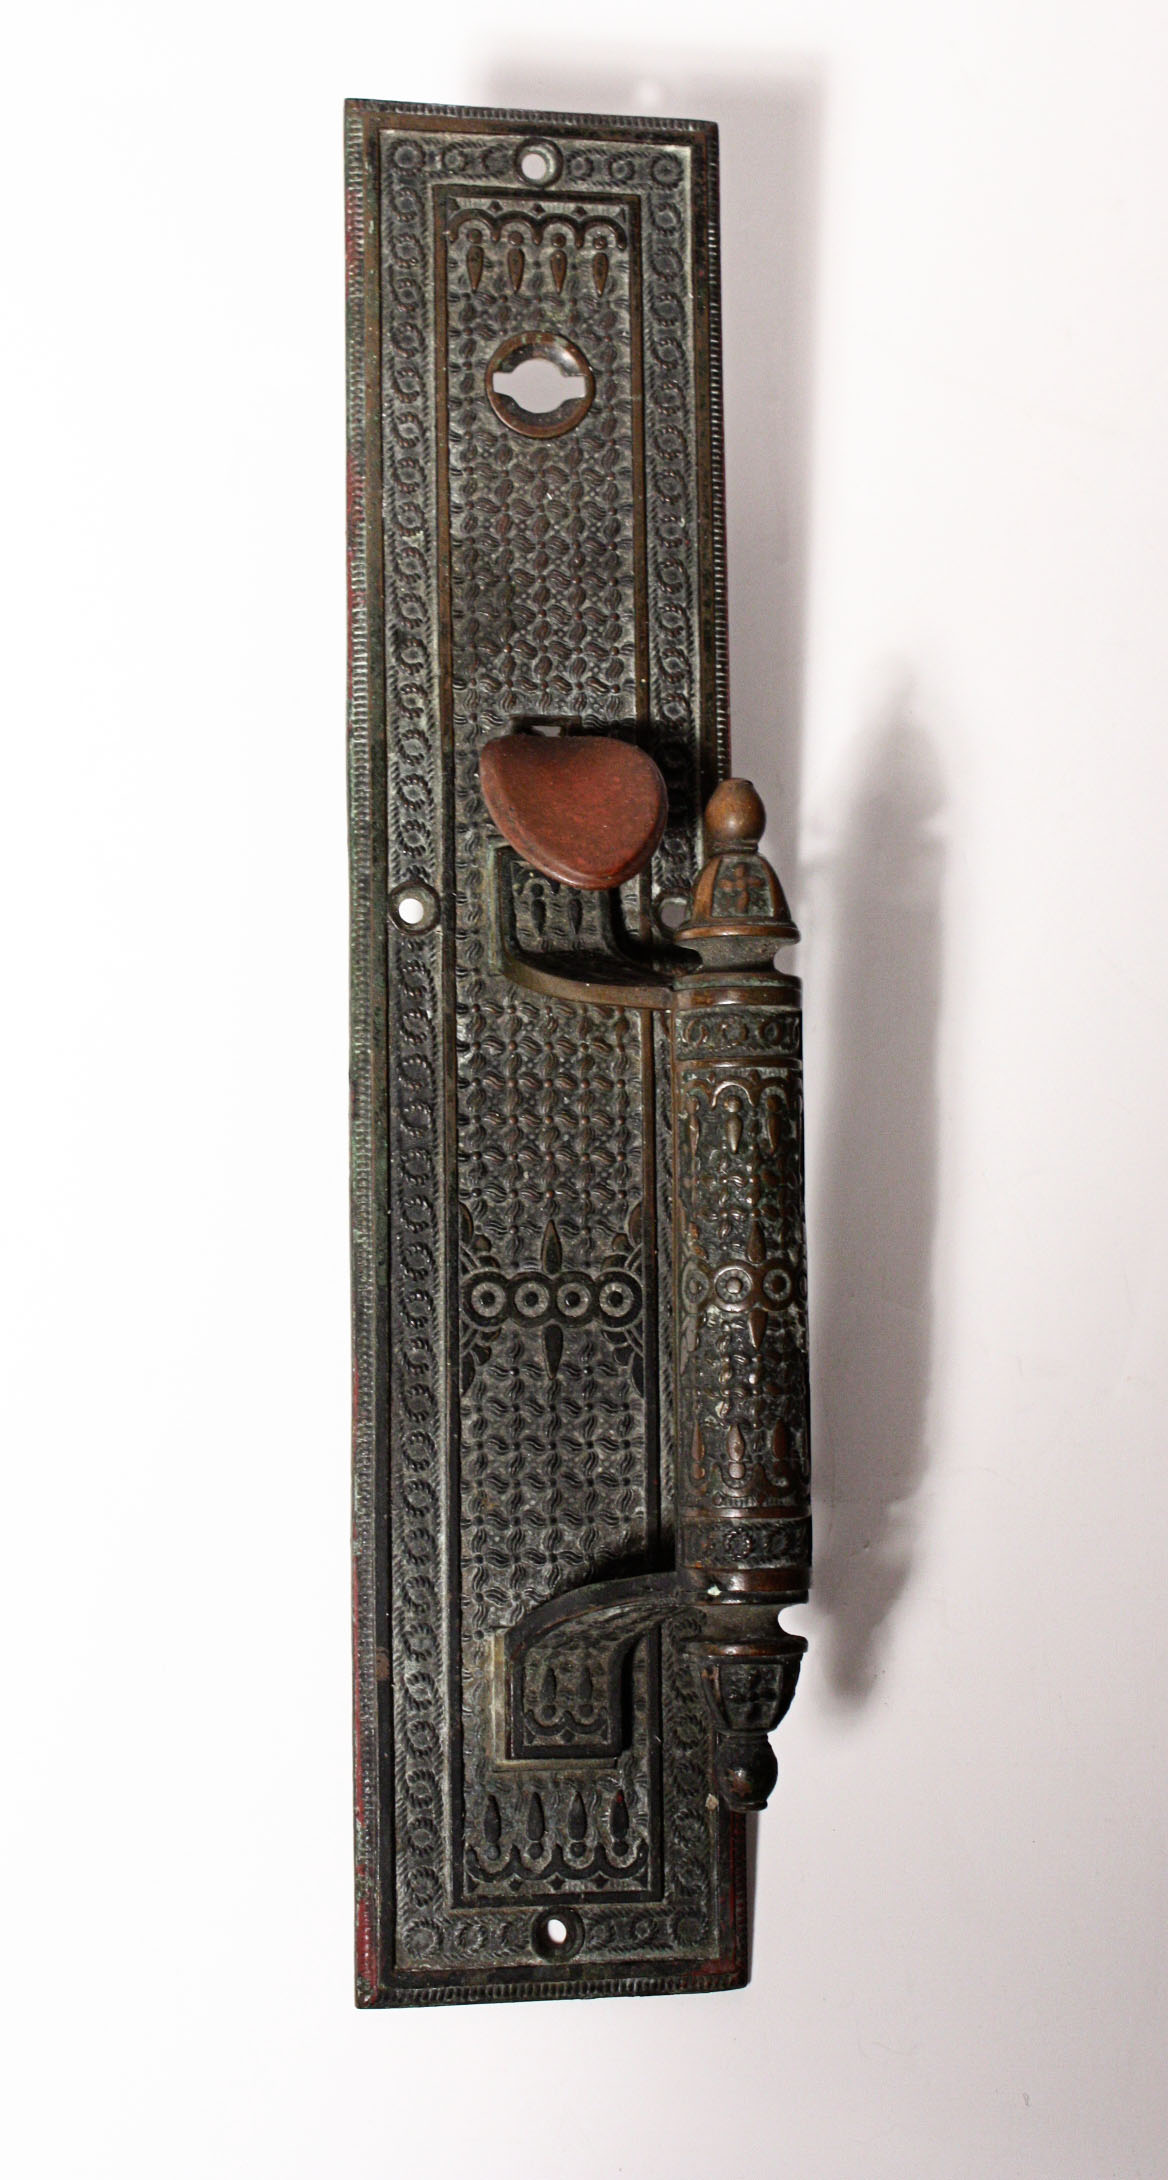 SOLD Exquisite Antique Cast Bronze Door Pull with Thumb Latch, “Elaine” by Reading Hardware-0